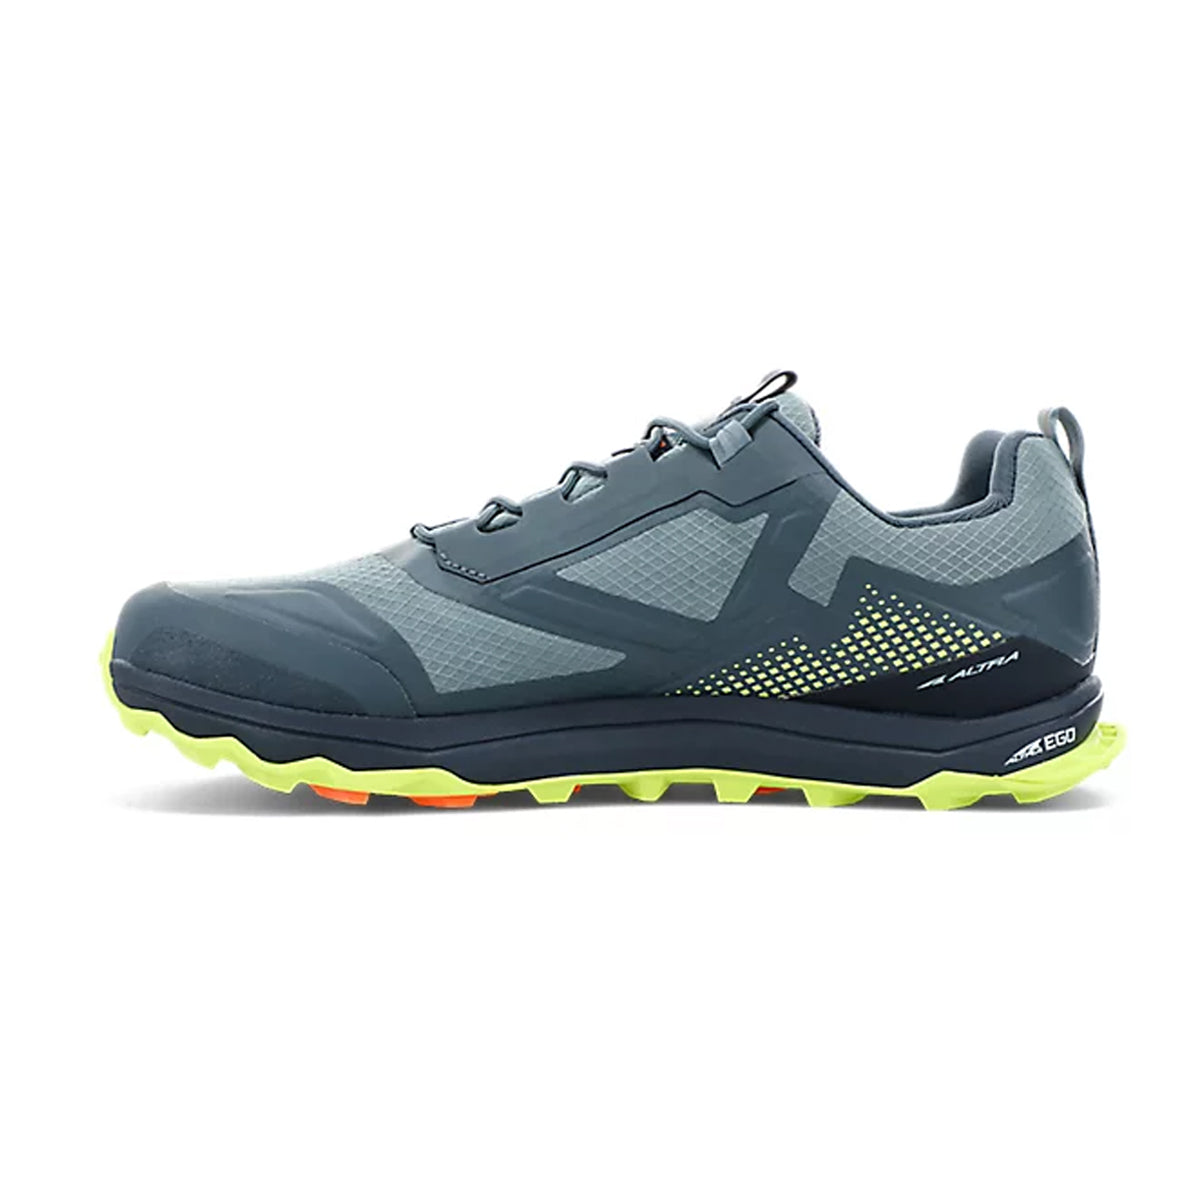 Altra Lone Peak All-WTHR Low in Gray & Lime by GOHUNT | Altra - GOHUNT Shop